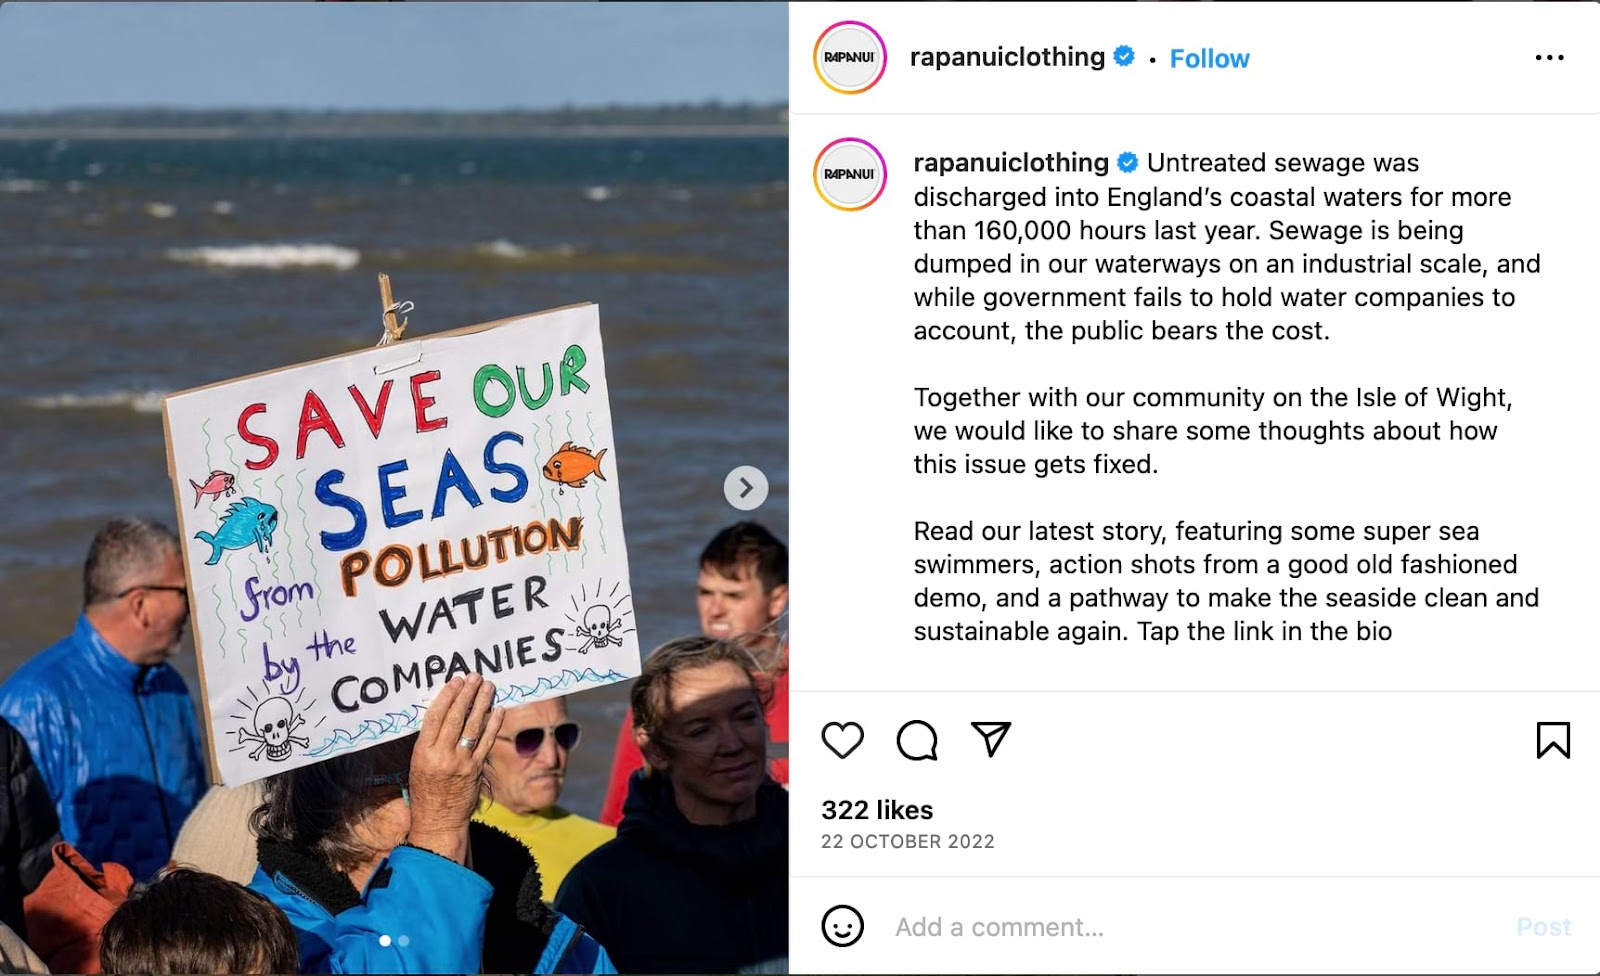 Rapanui's Instagram post about reducing pollution in the seas and what they do with the community